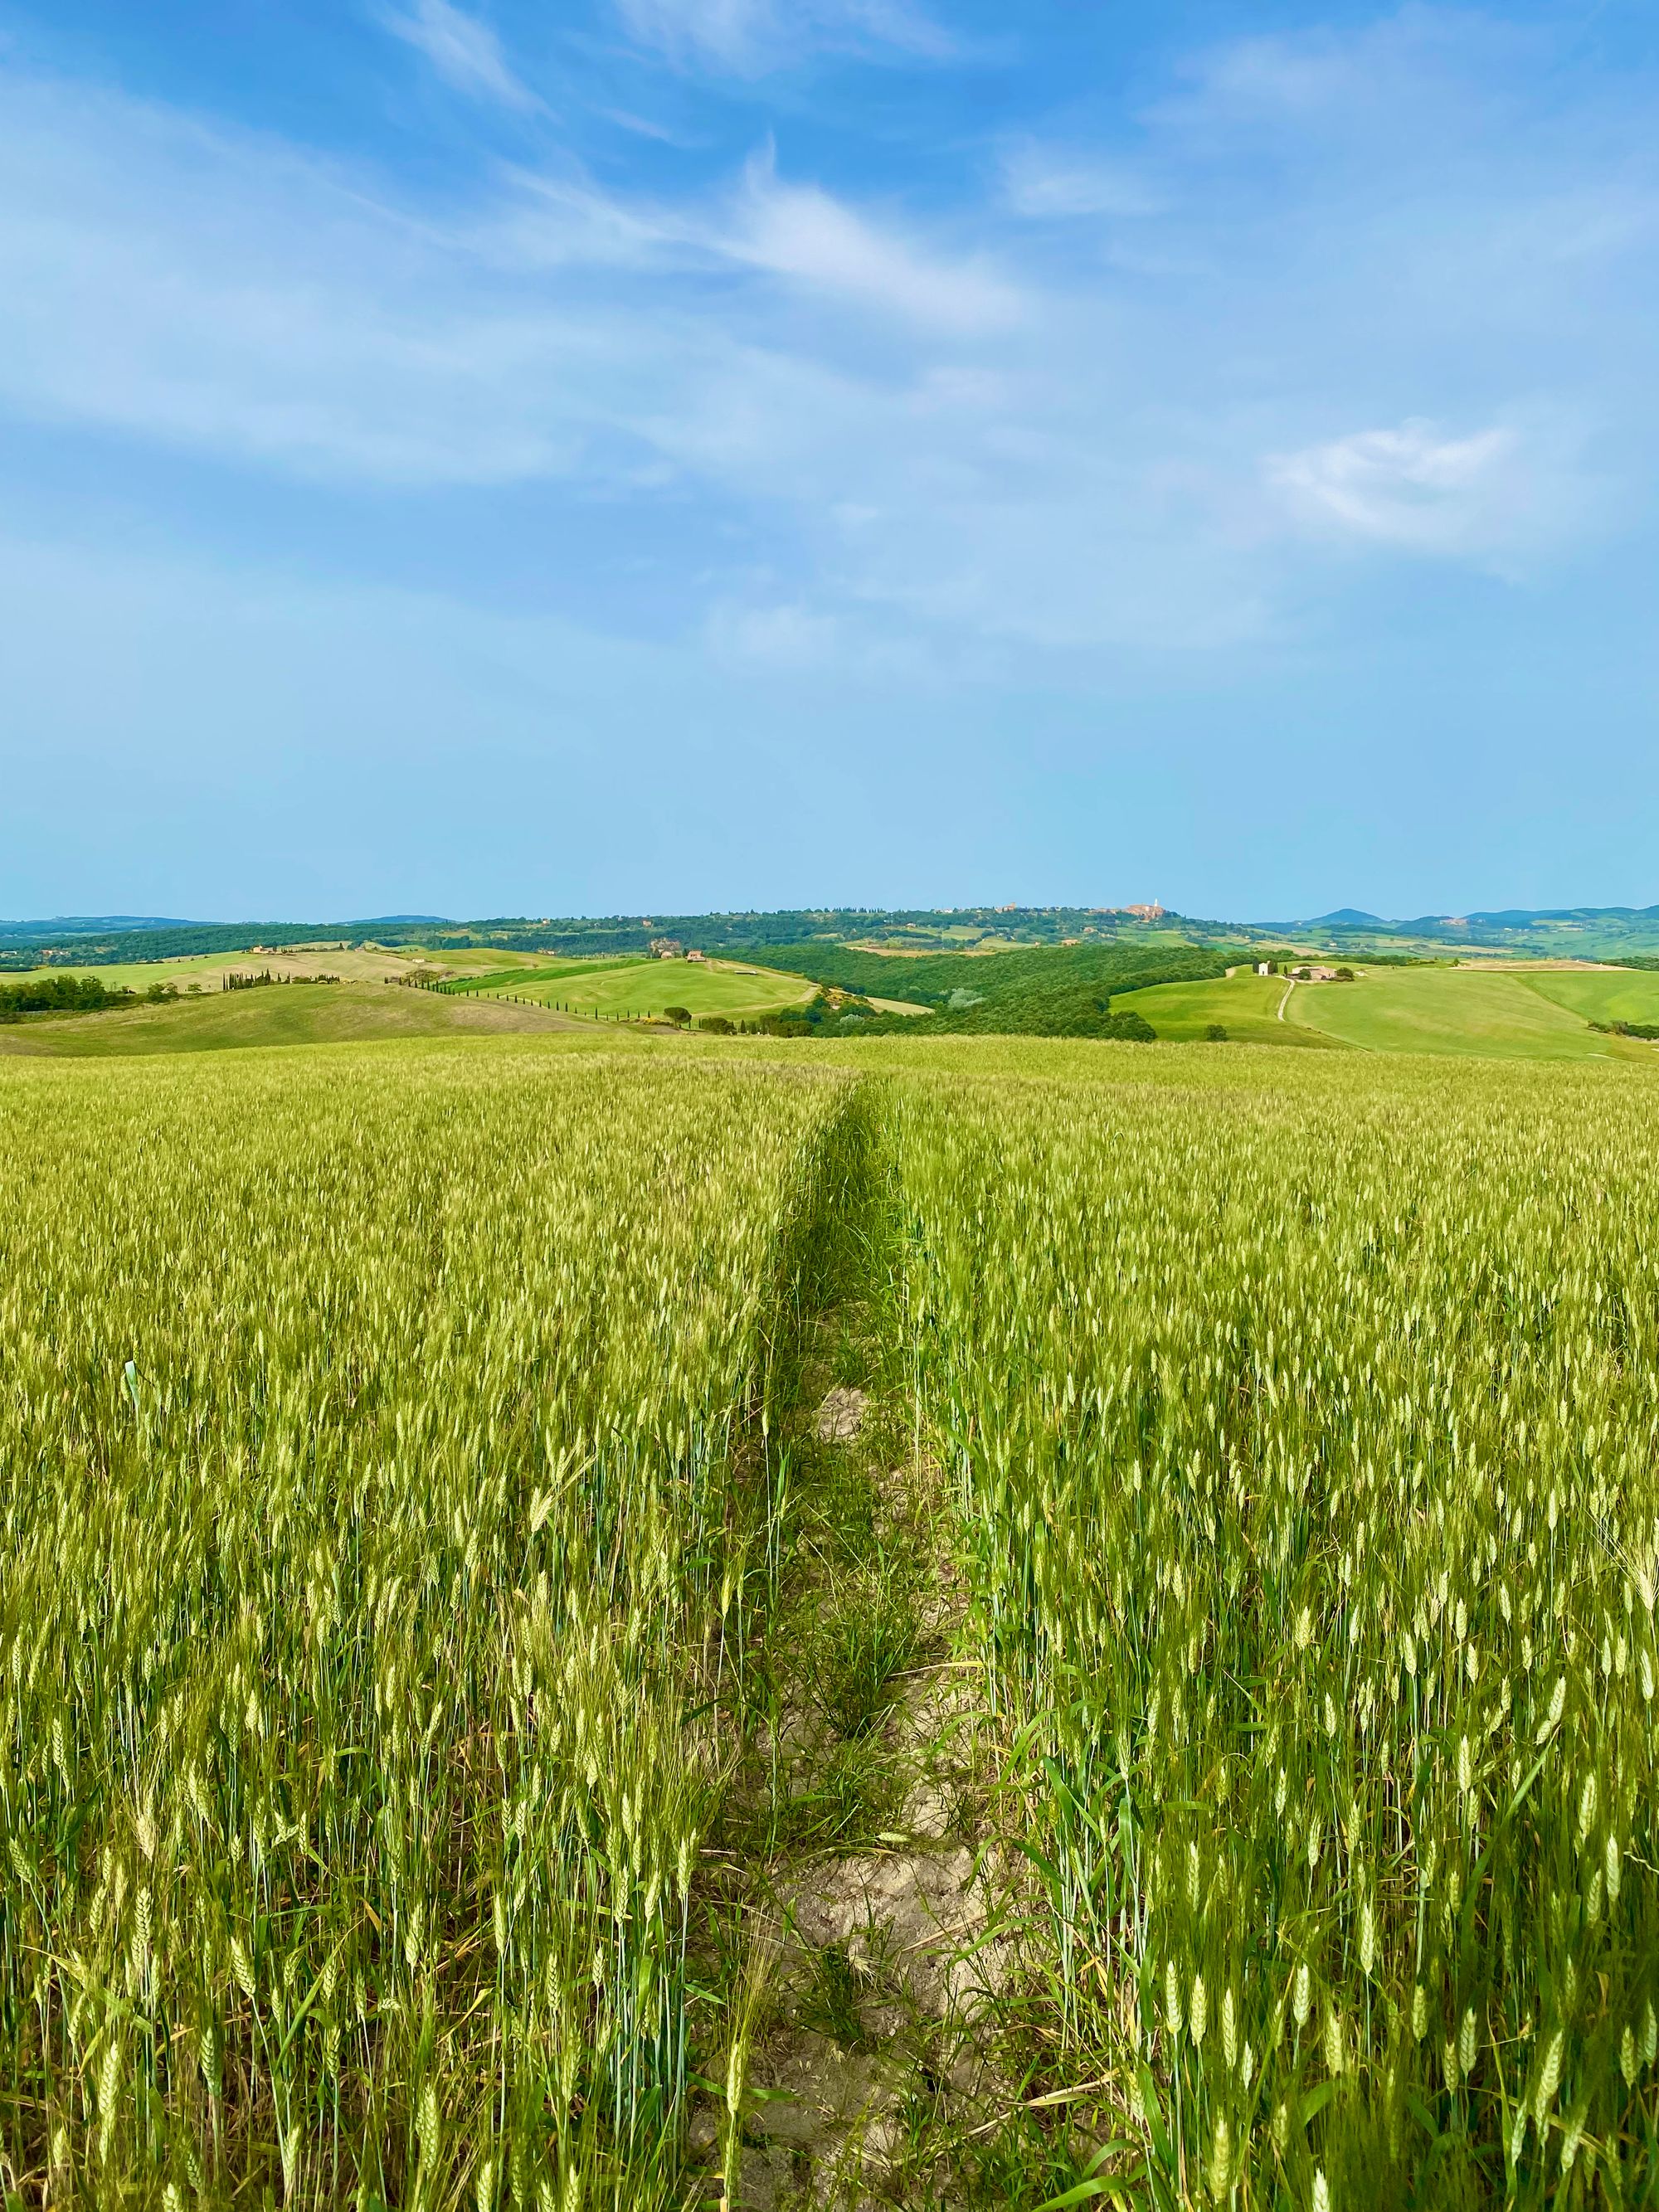 A green wheat field in Val d'Orcia, Tuscany